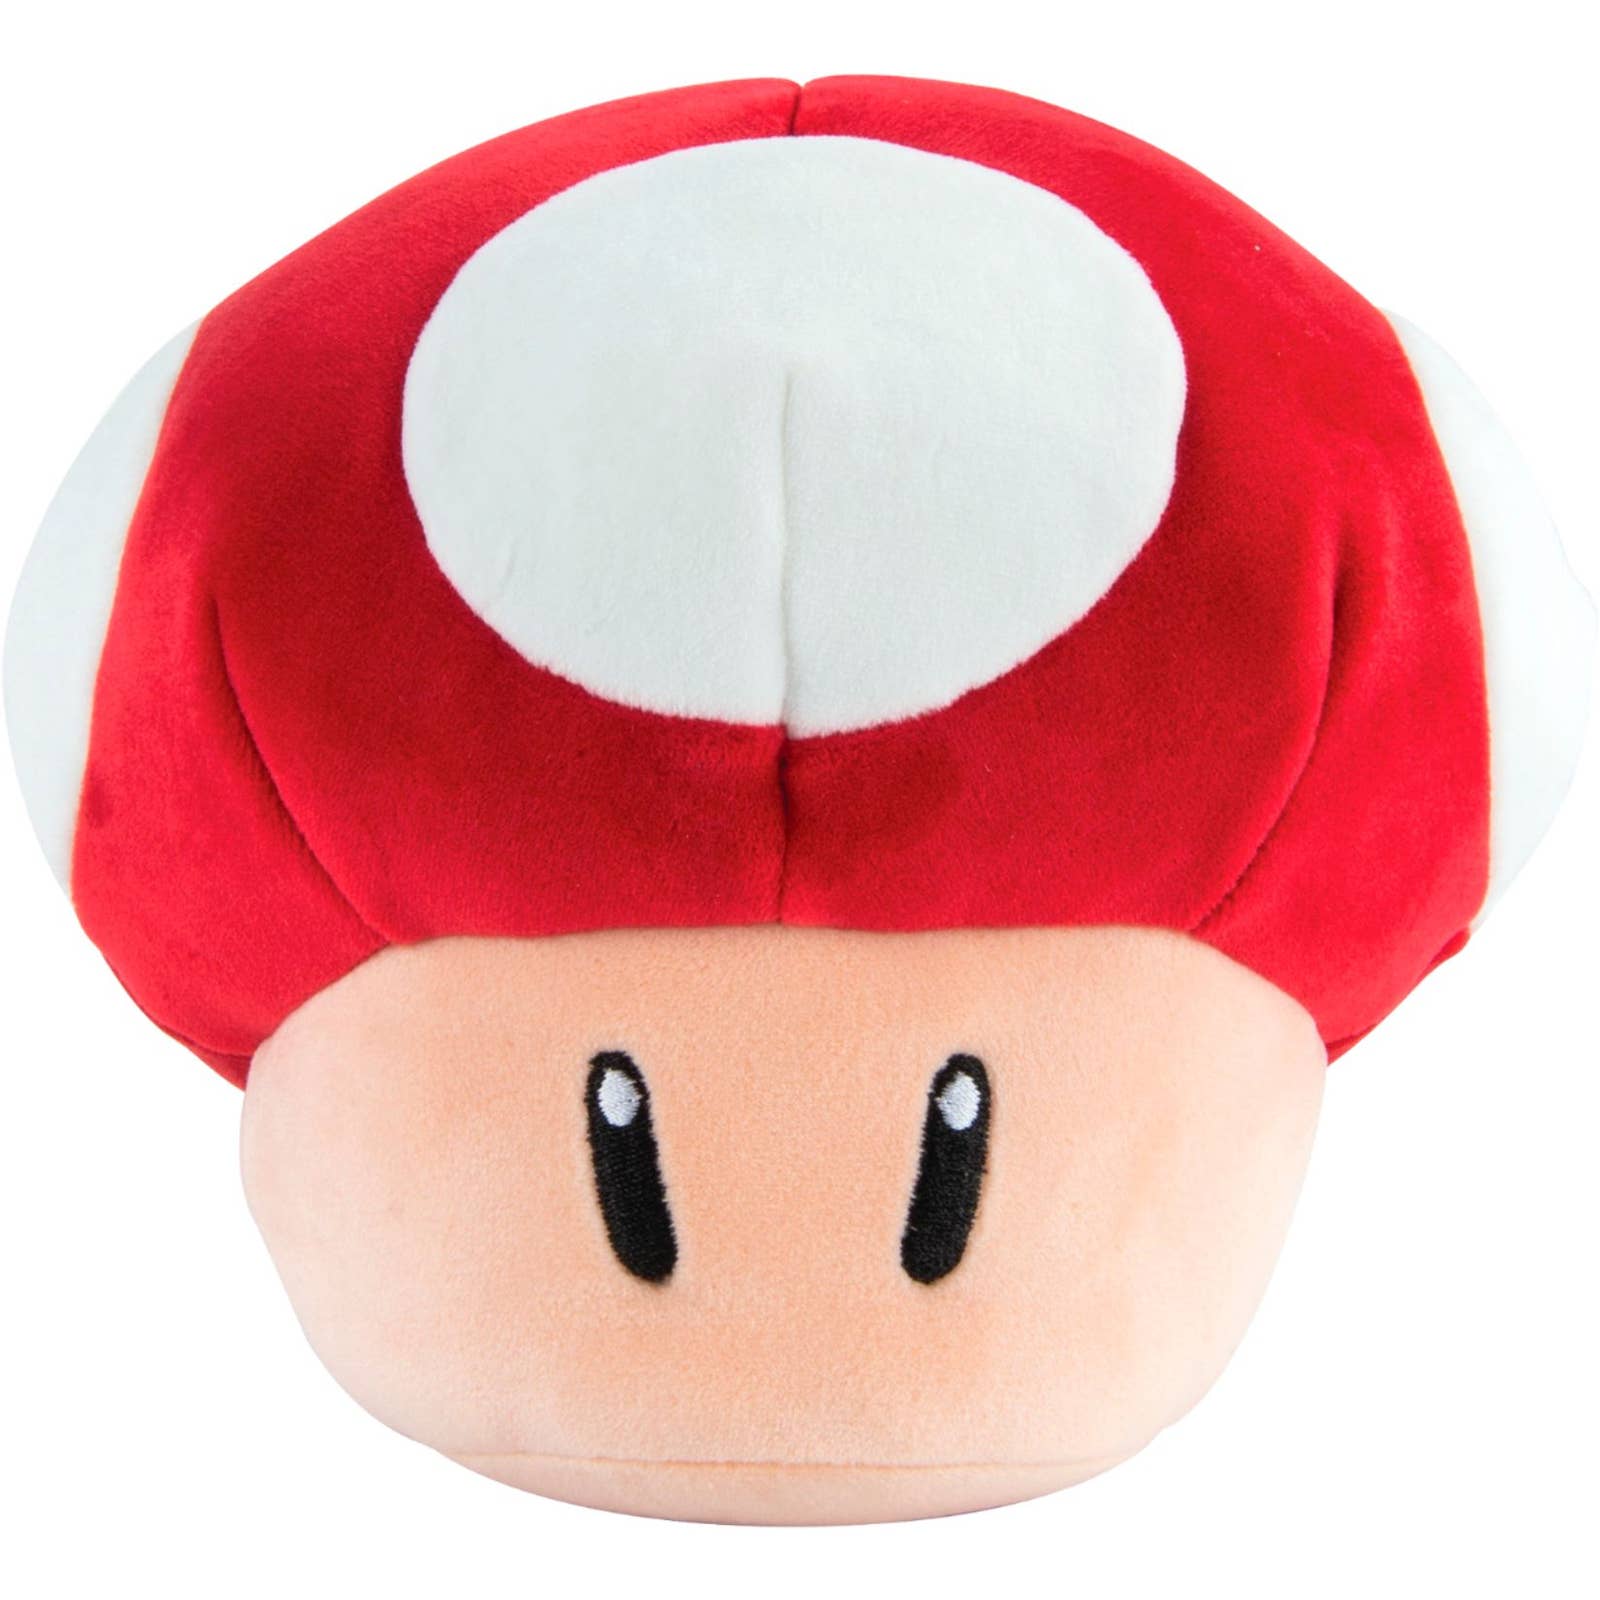 TOMY - T12700A1 Club Mocchi-Mocchi - Super Mario Junior 6 inch Plush Stuffed Toy - Styles May Vary